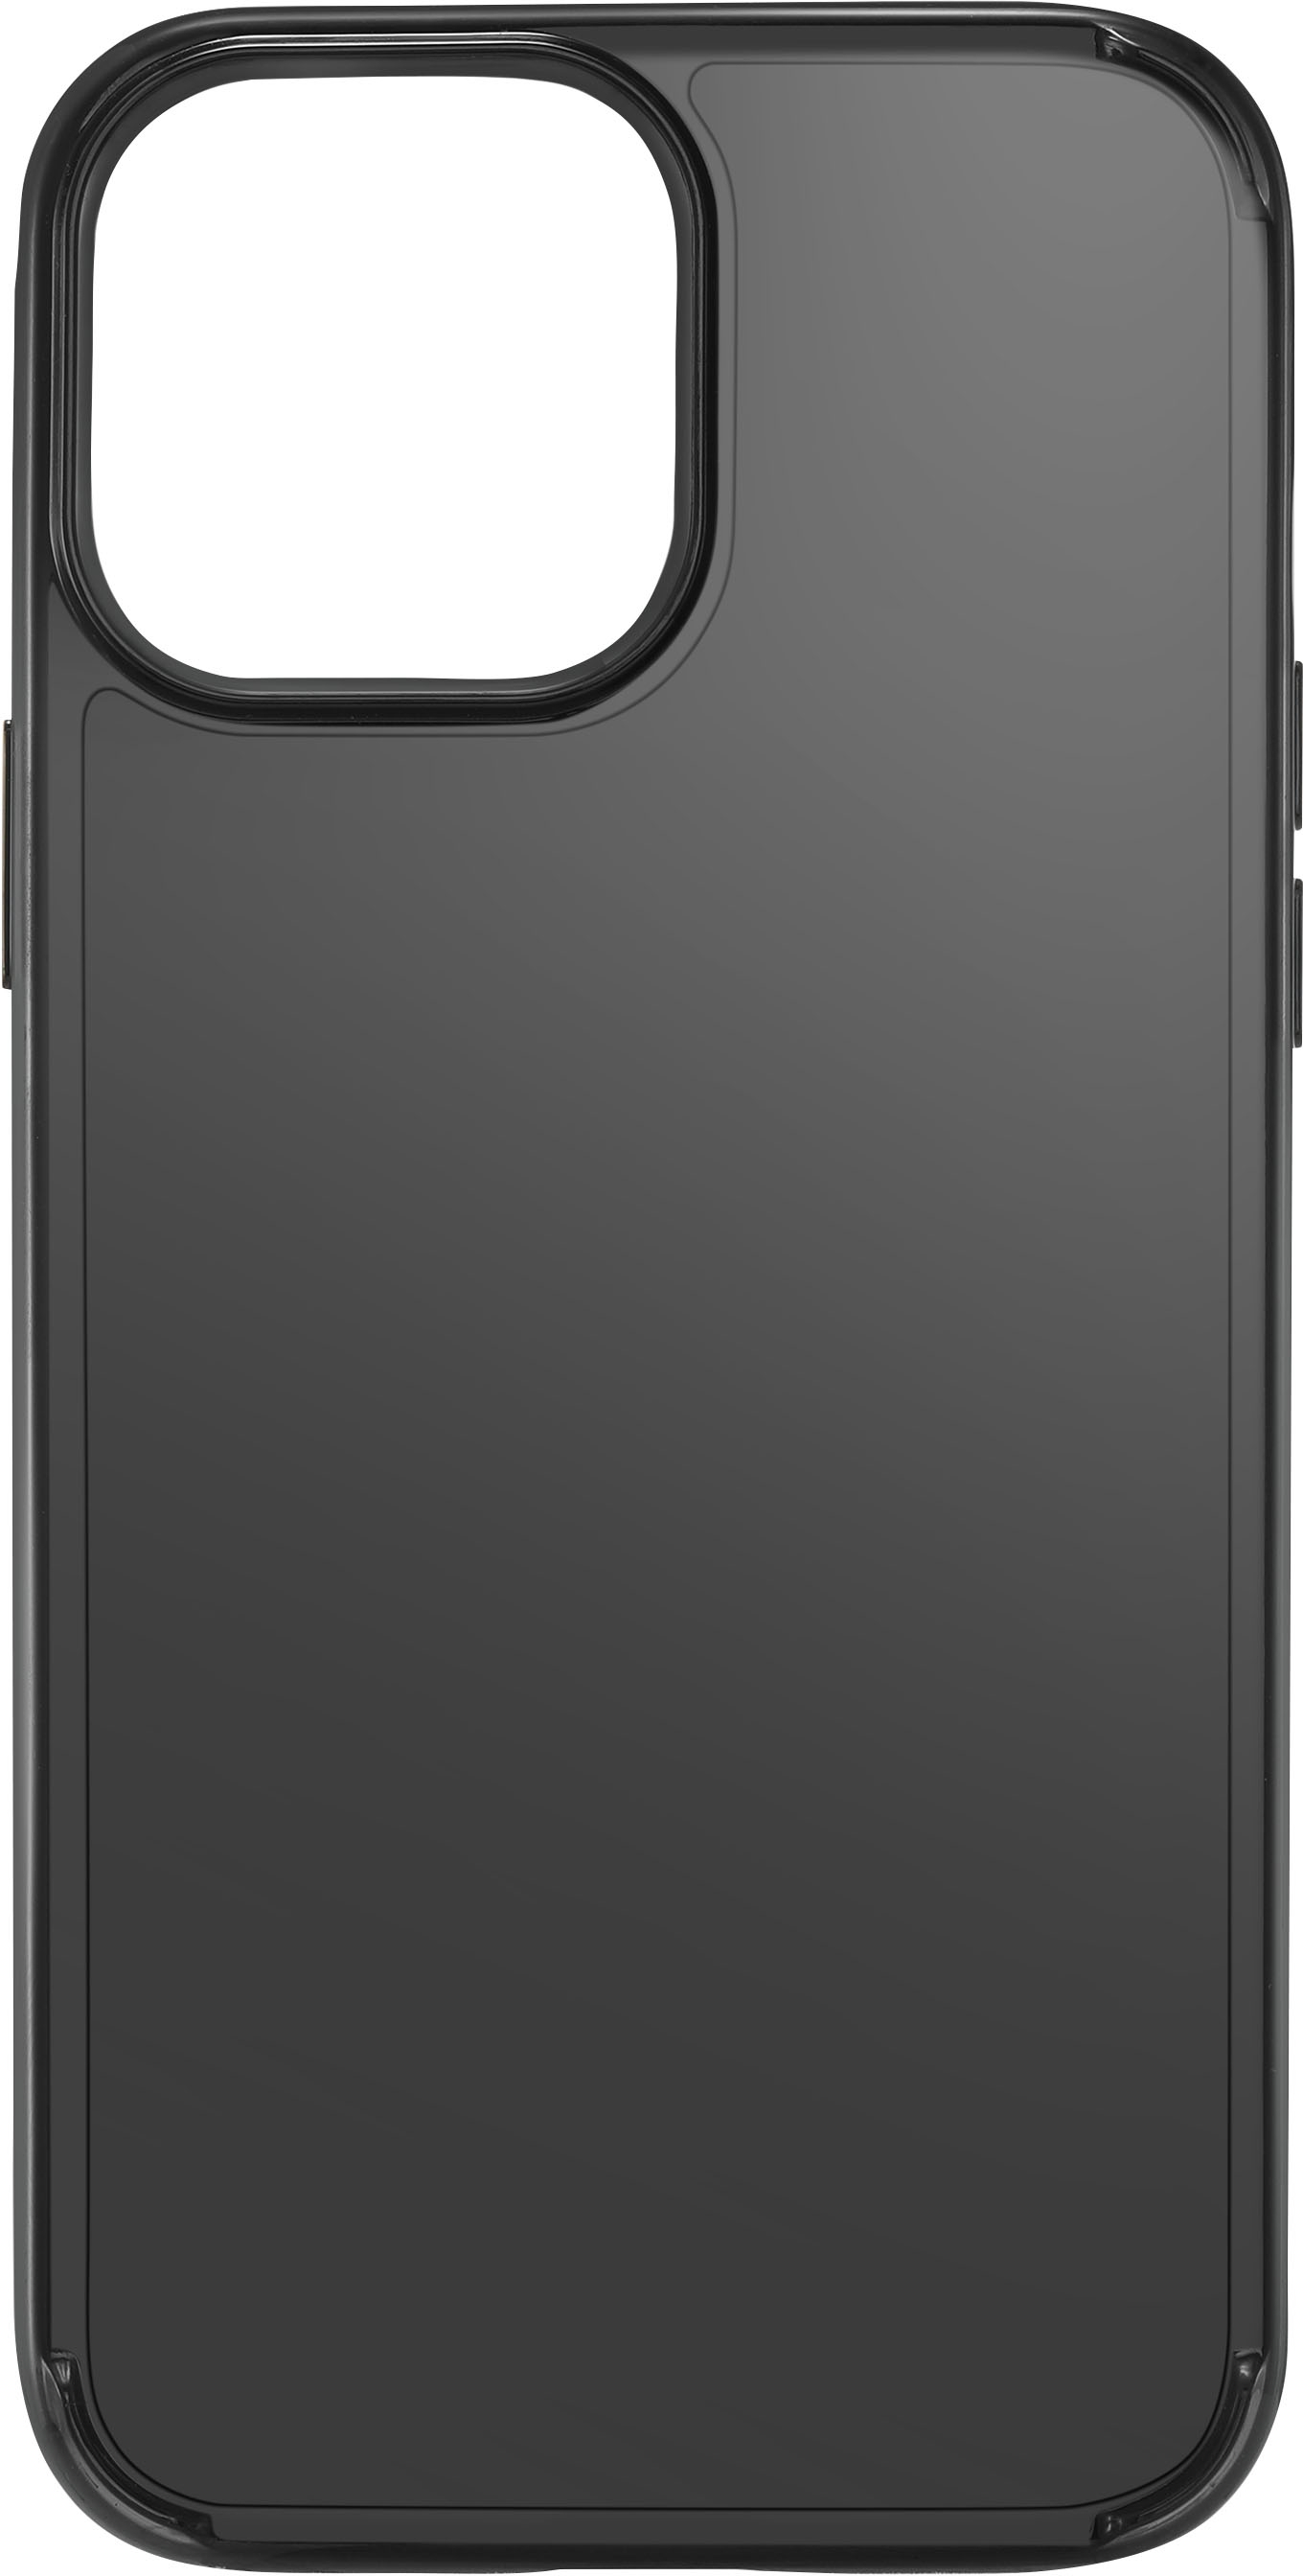 Insignia- Hard Shell Case with MagSafe for iPhone 13 Pro Max and iPhone 12